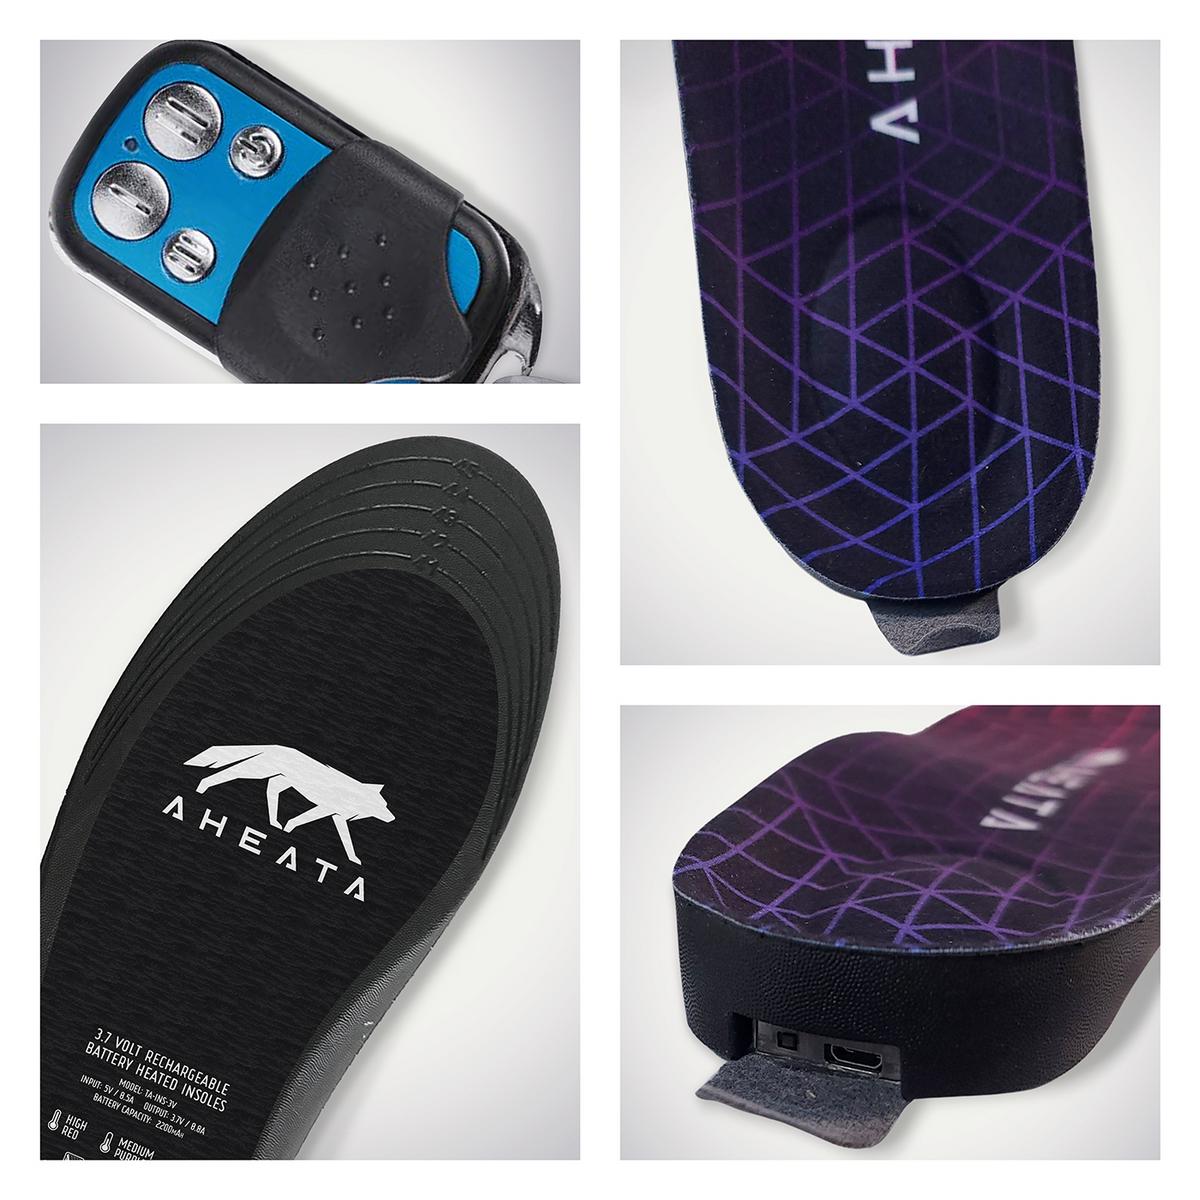 Aheata Rechargeable Heated Insoles with Remote